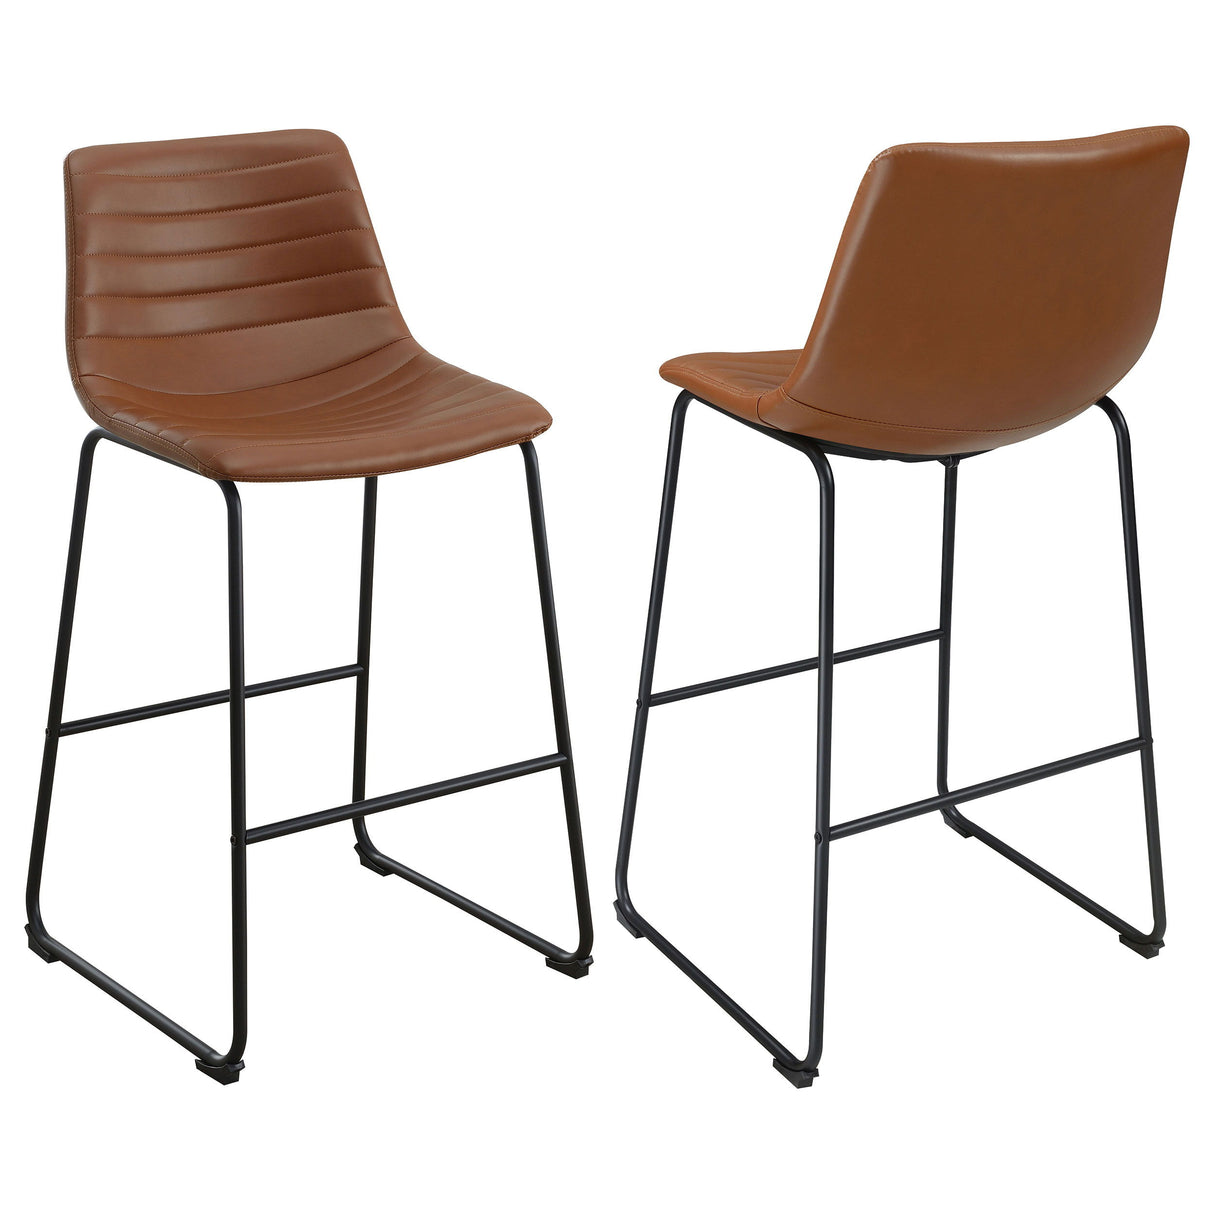 Zuni - Faux Leather Upholstered Bar Chair (Set of 2)